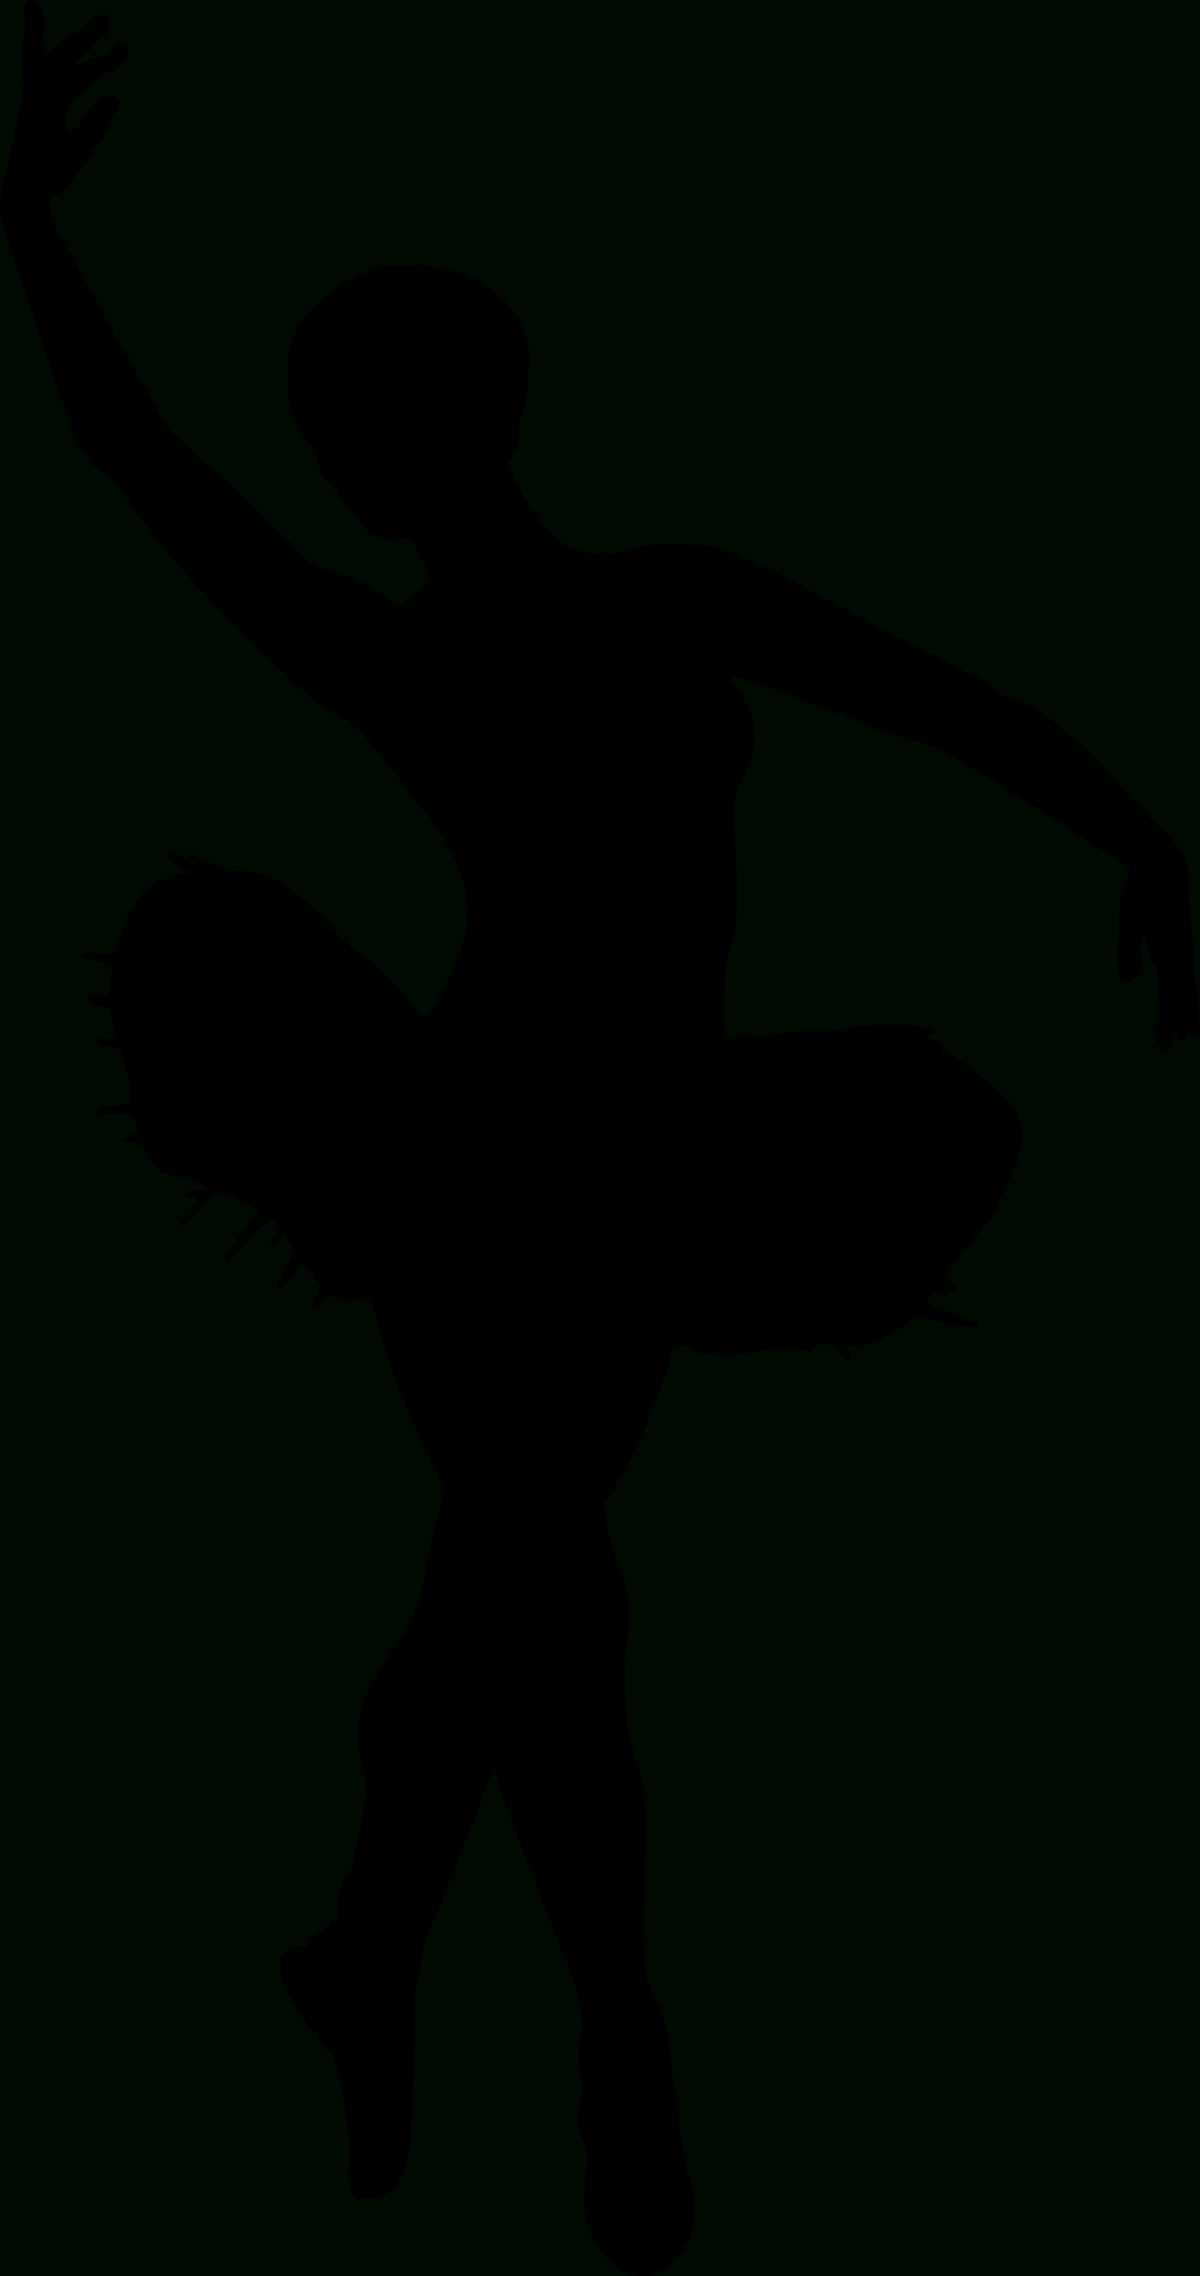 Free Ballet Silhouette Cliparts, Download Free Clip Art, Free Clip - Free Printable Ballerina Silhouette